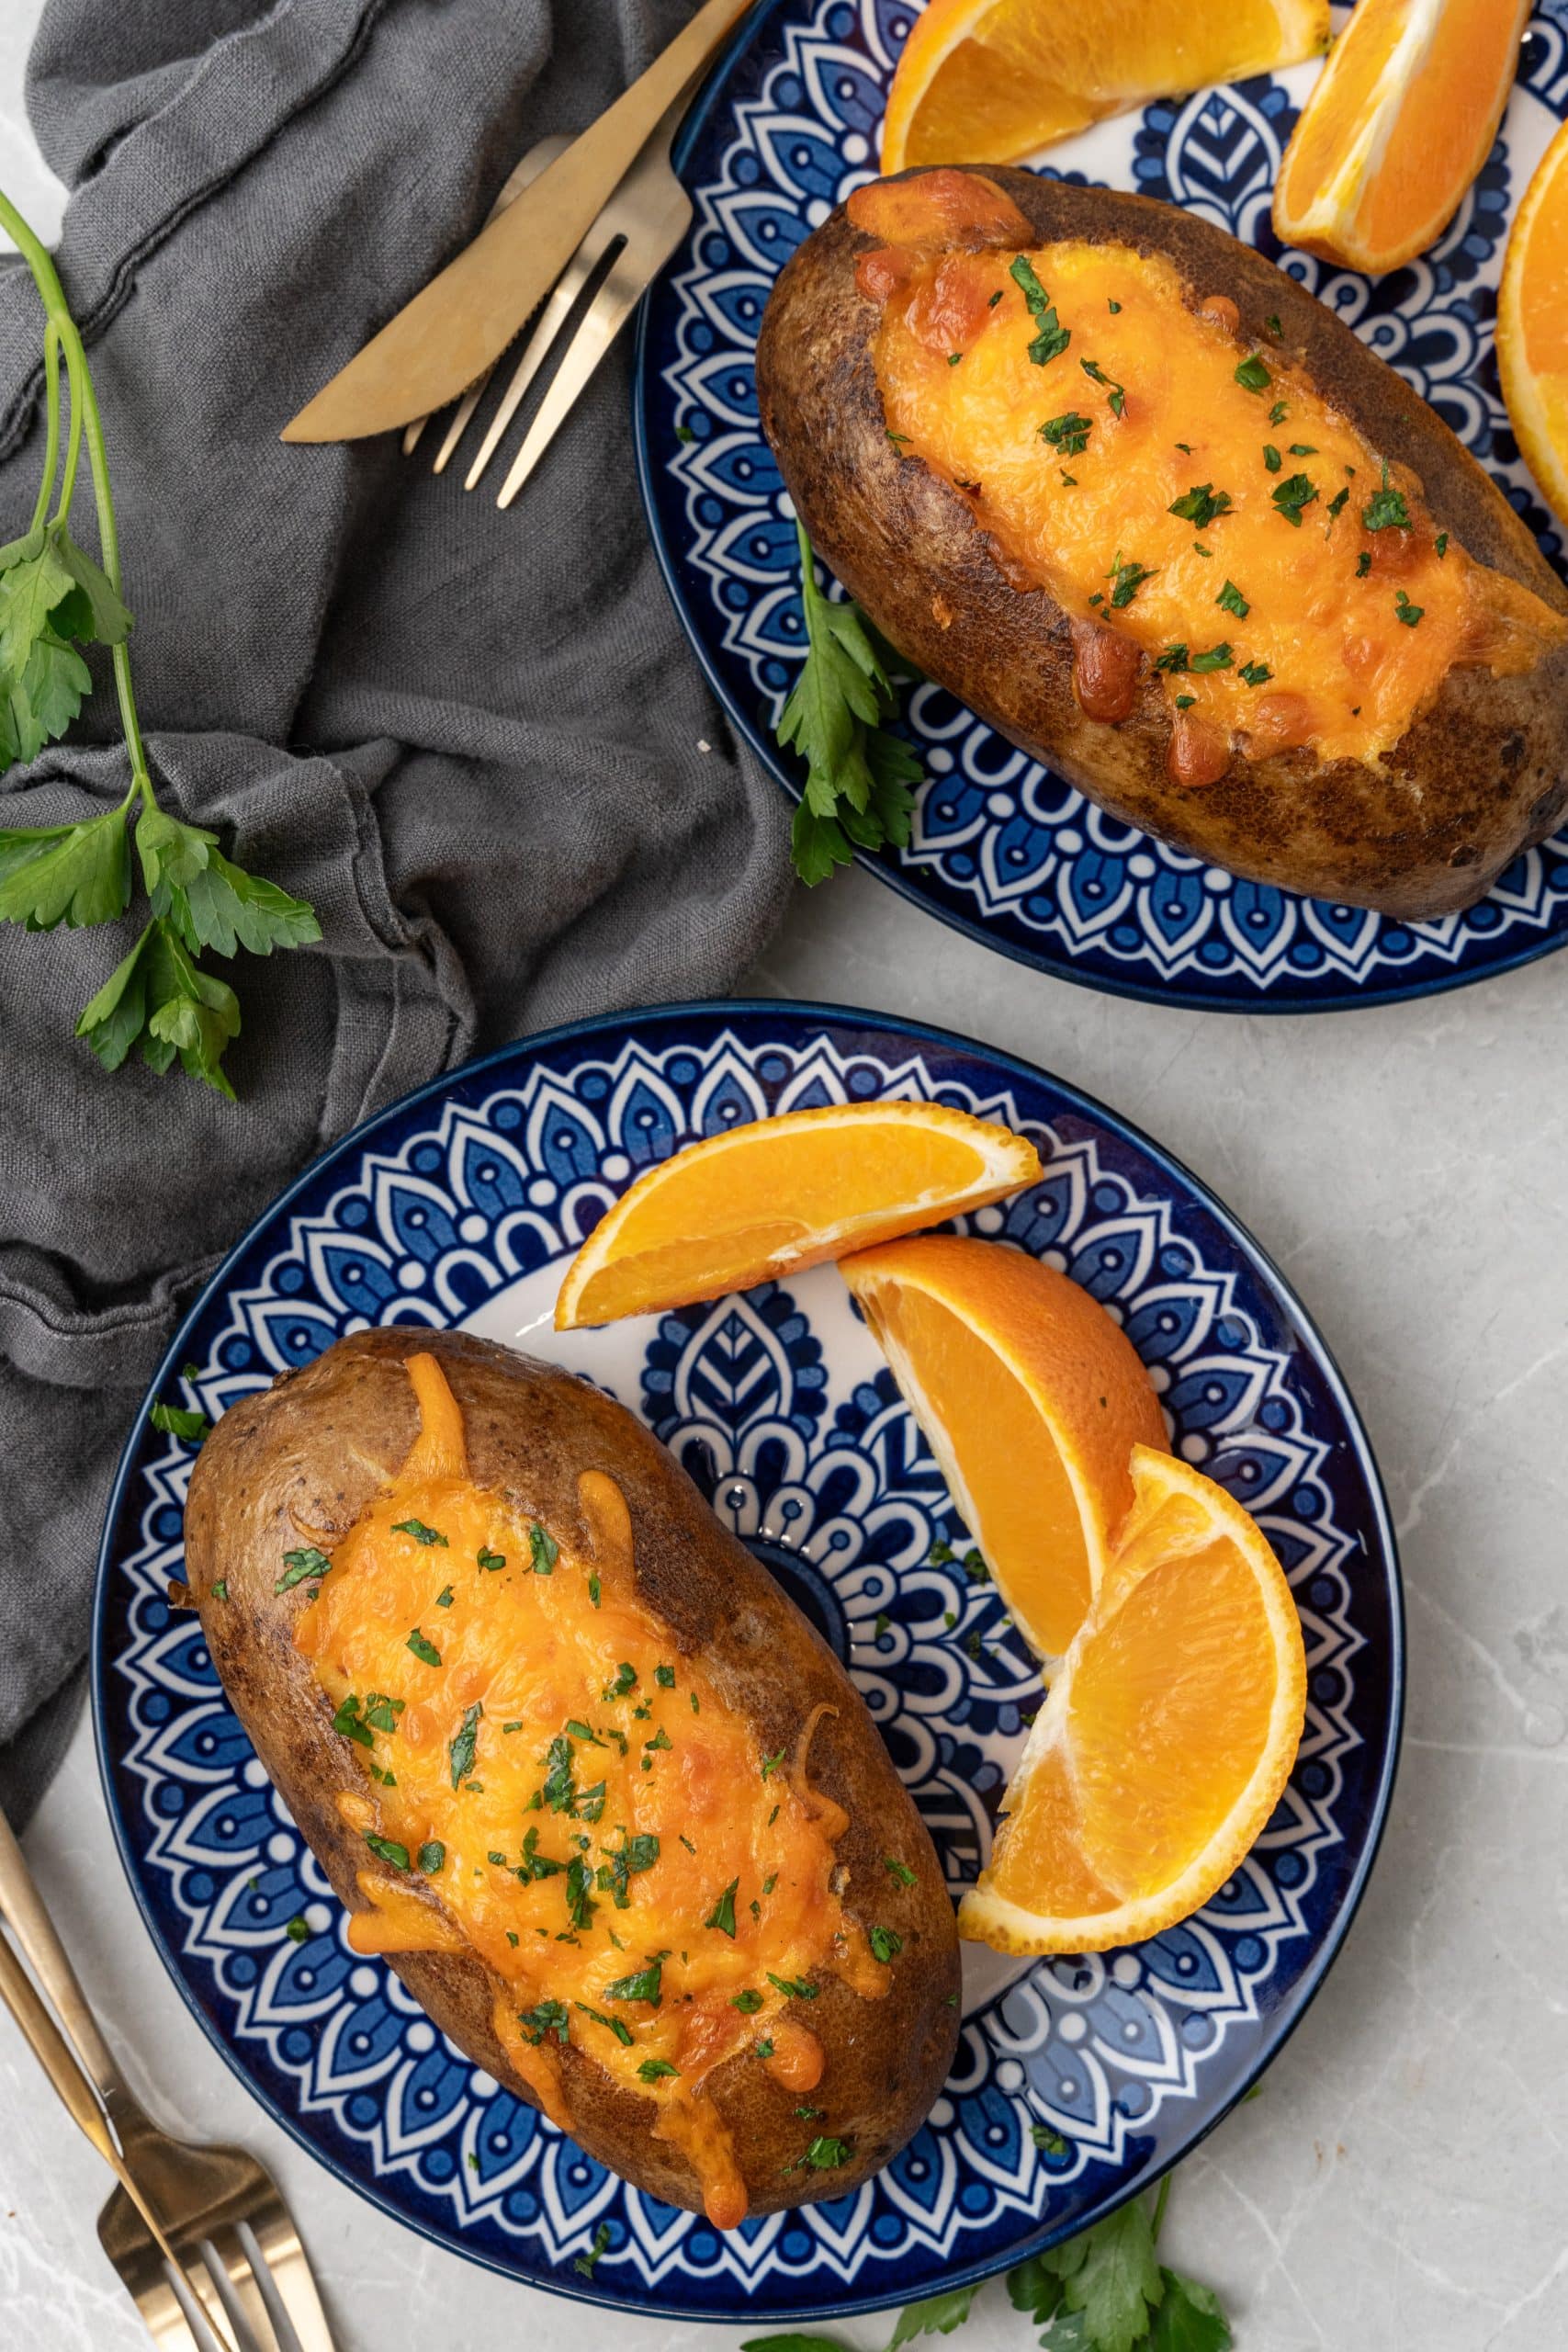 twice baked breakfast potatoes on blue and white plates with orange slices on the side